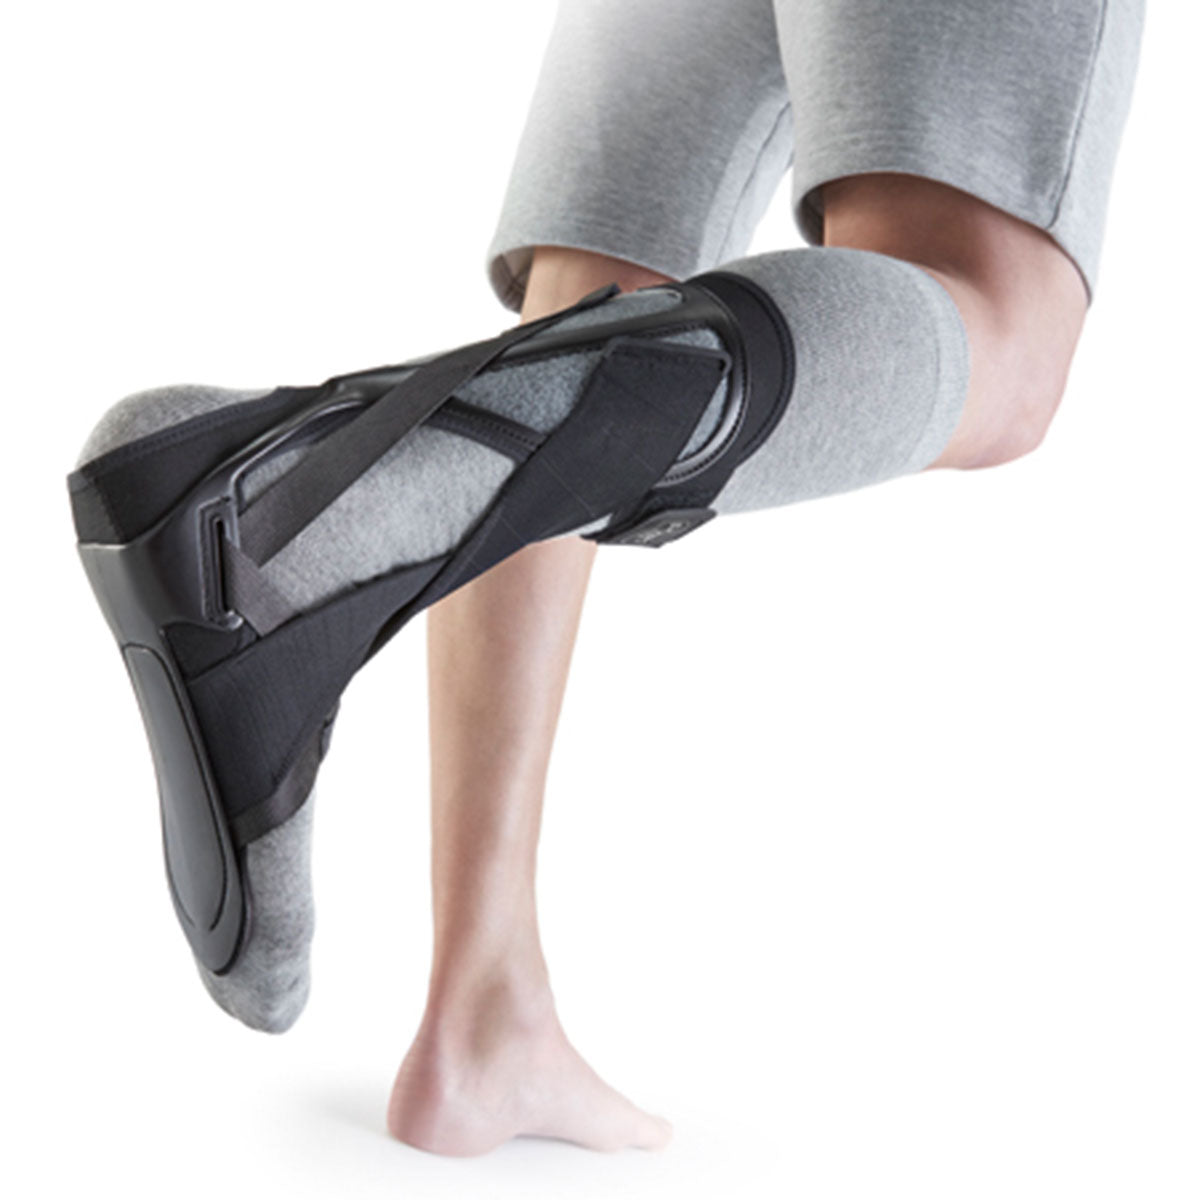 AFO ankle foot orthotics, Best drop foot braces - Turbomed